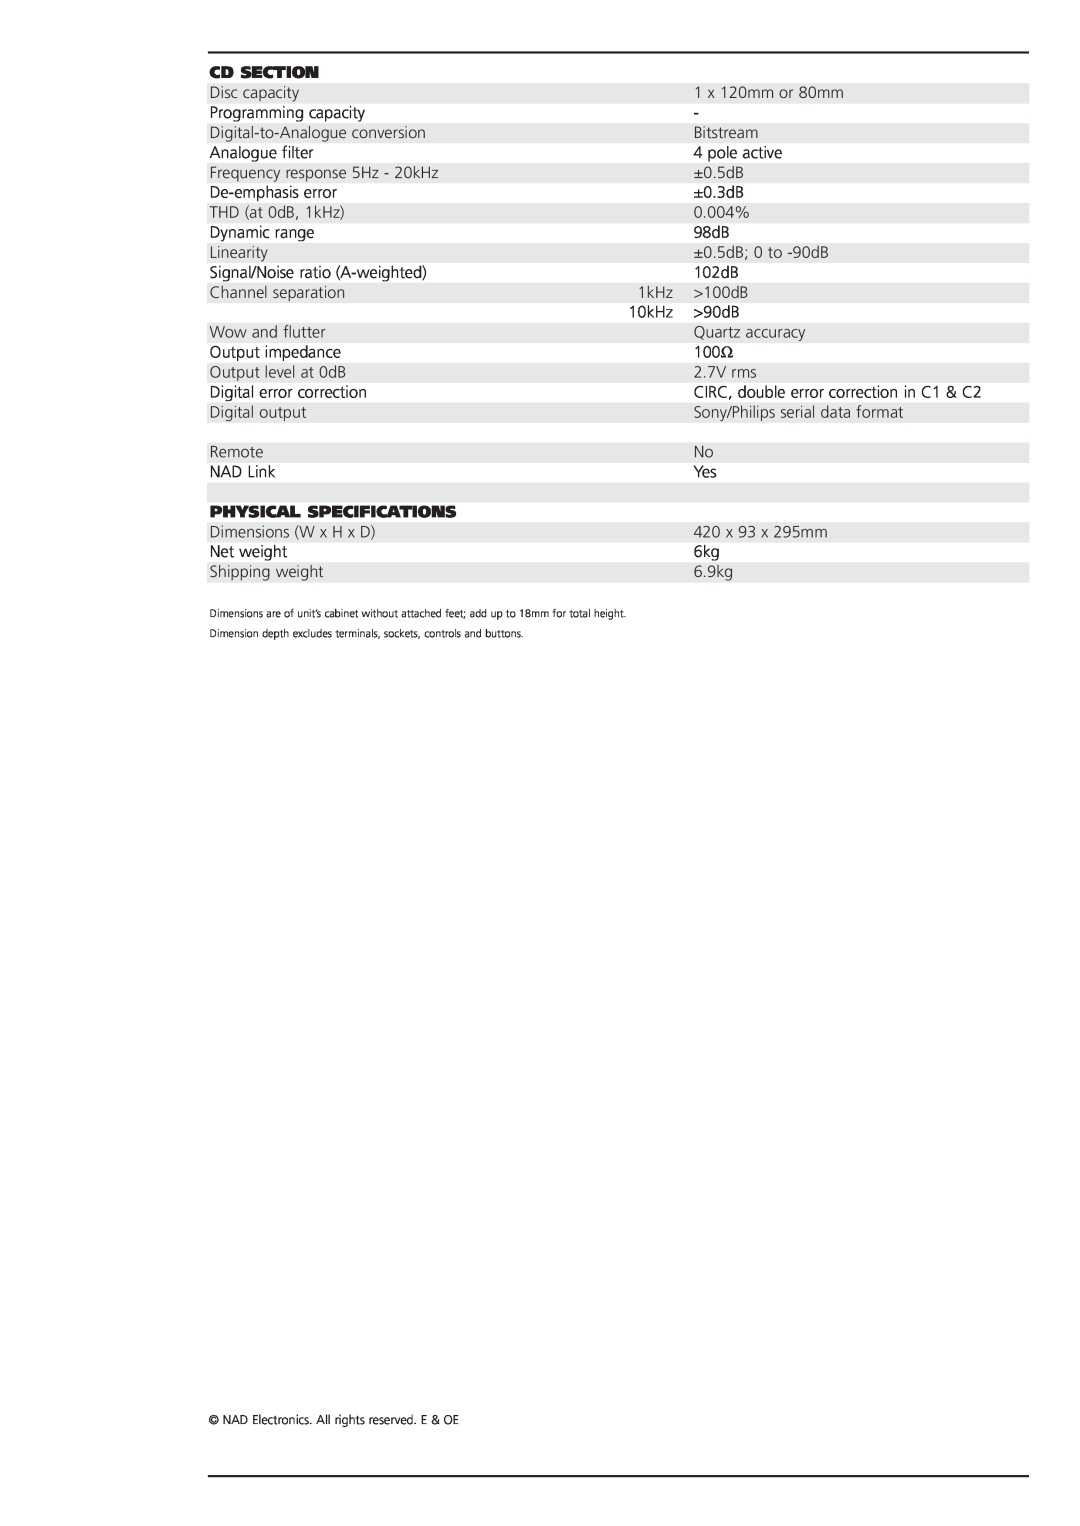 NAD 501 brochure Cd Section, Physical Specifications 